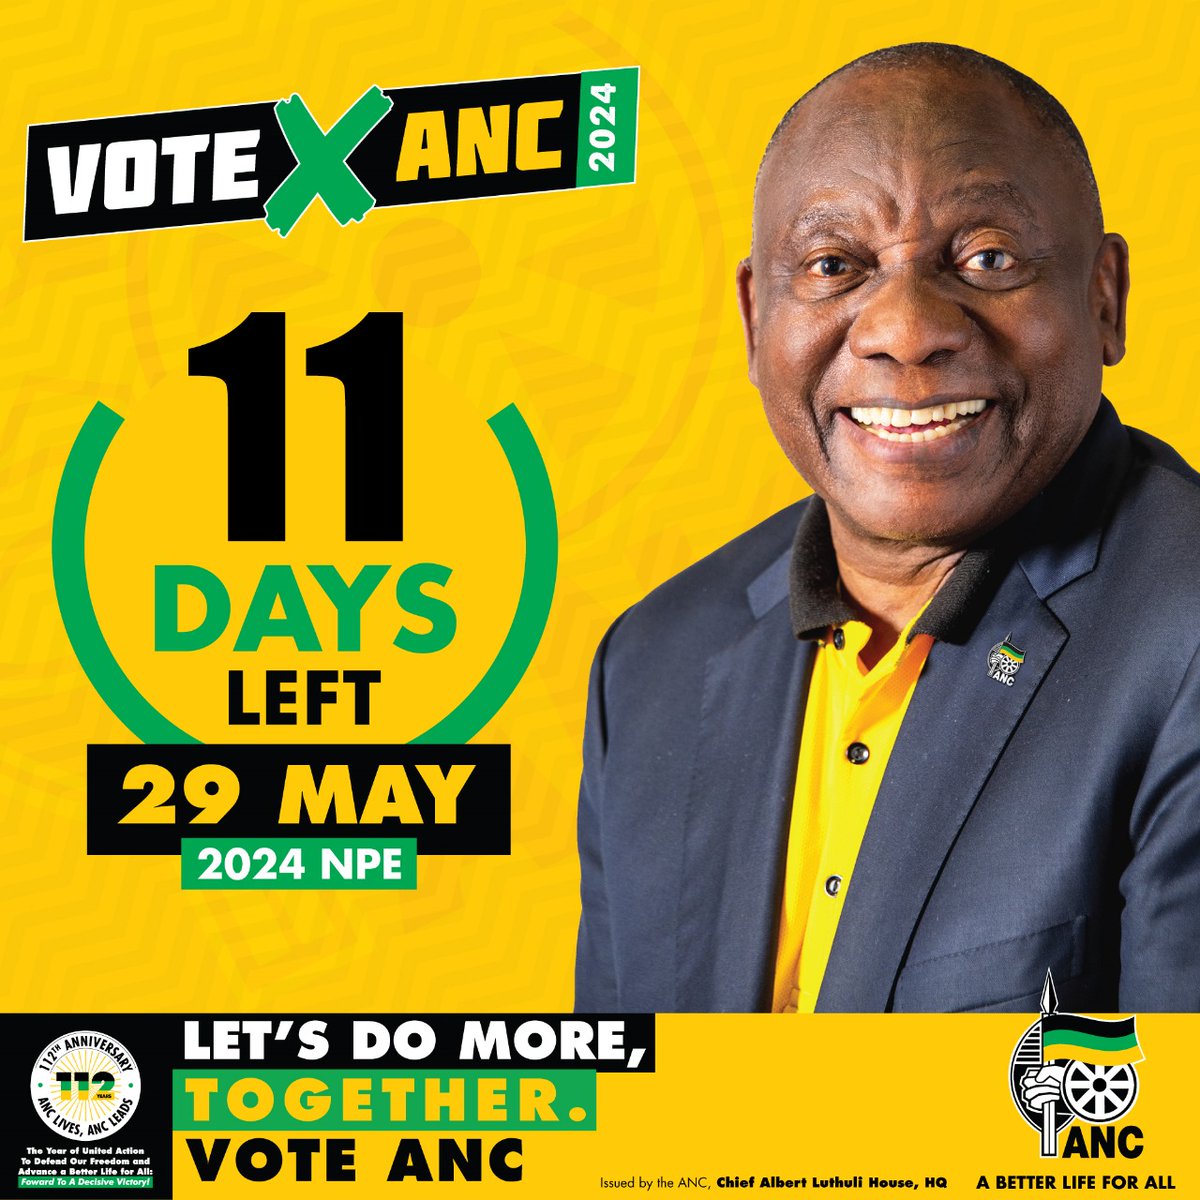 11 Days to go until the 2024 National and Provincial Elections, vote ANC on the 29th of May 2024!

1st Ballot: #VoteANC ❎
2nd Ballot: #VoteANC ❎
3rd Ballot: #VoteANC ❎

#VoteANC2024
#LetsDoMoreTogether ⚫️🟢🟡